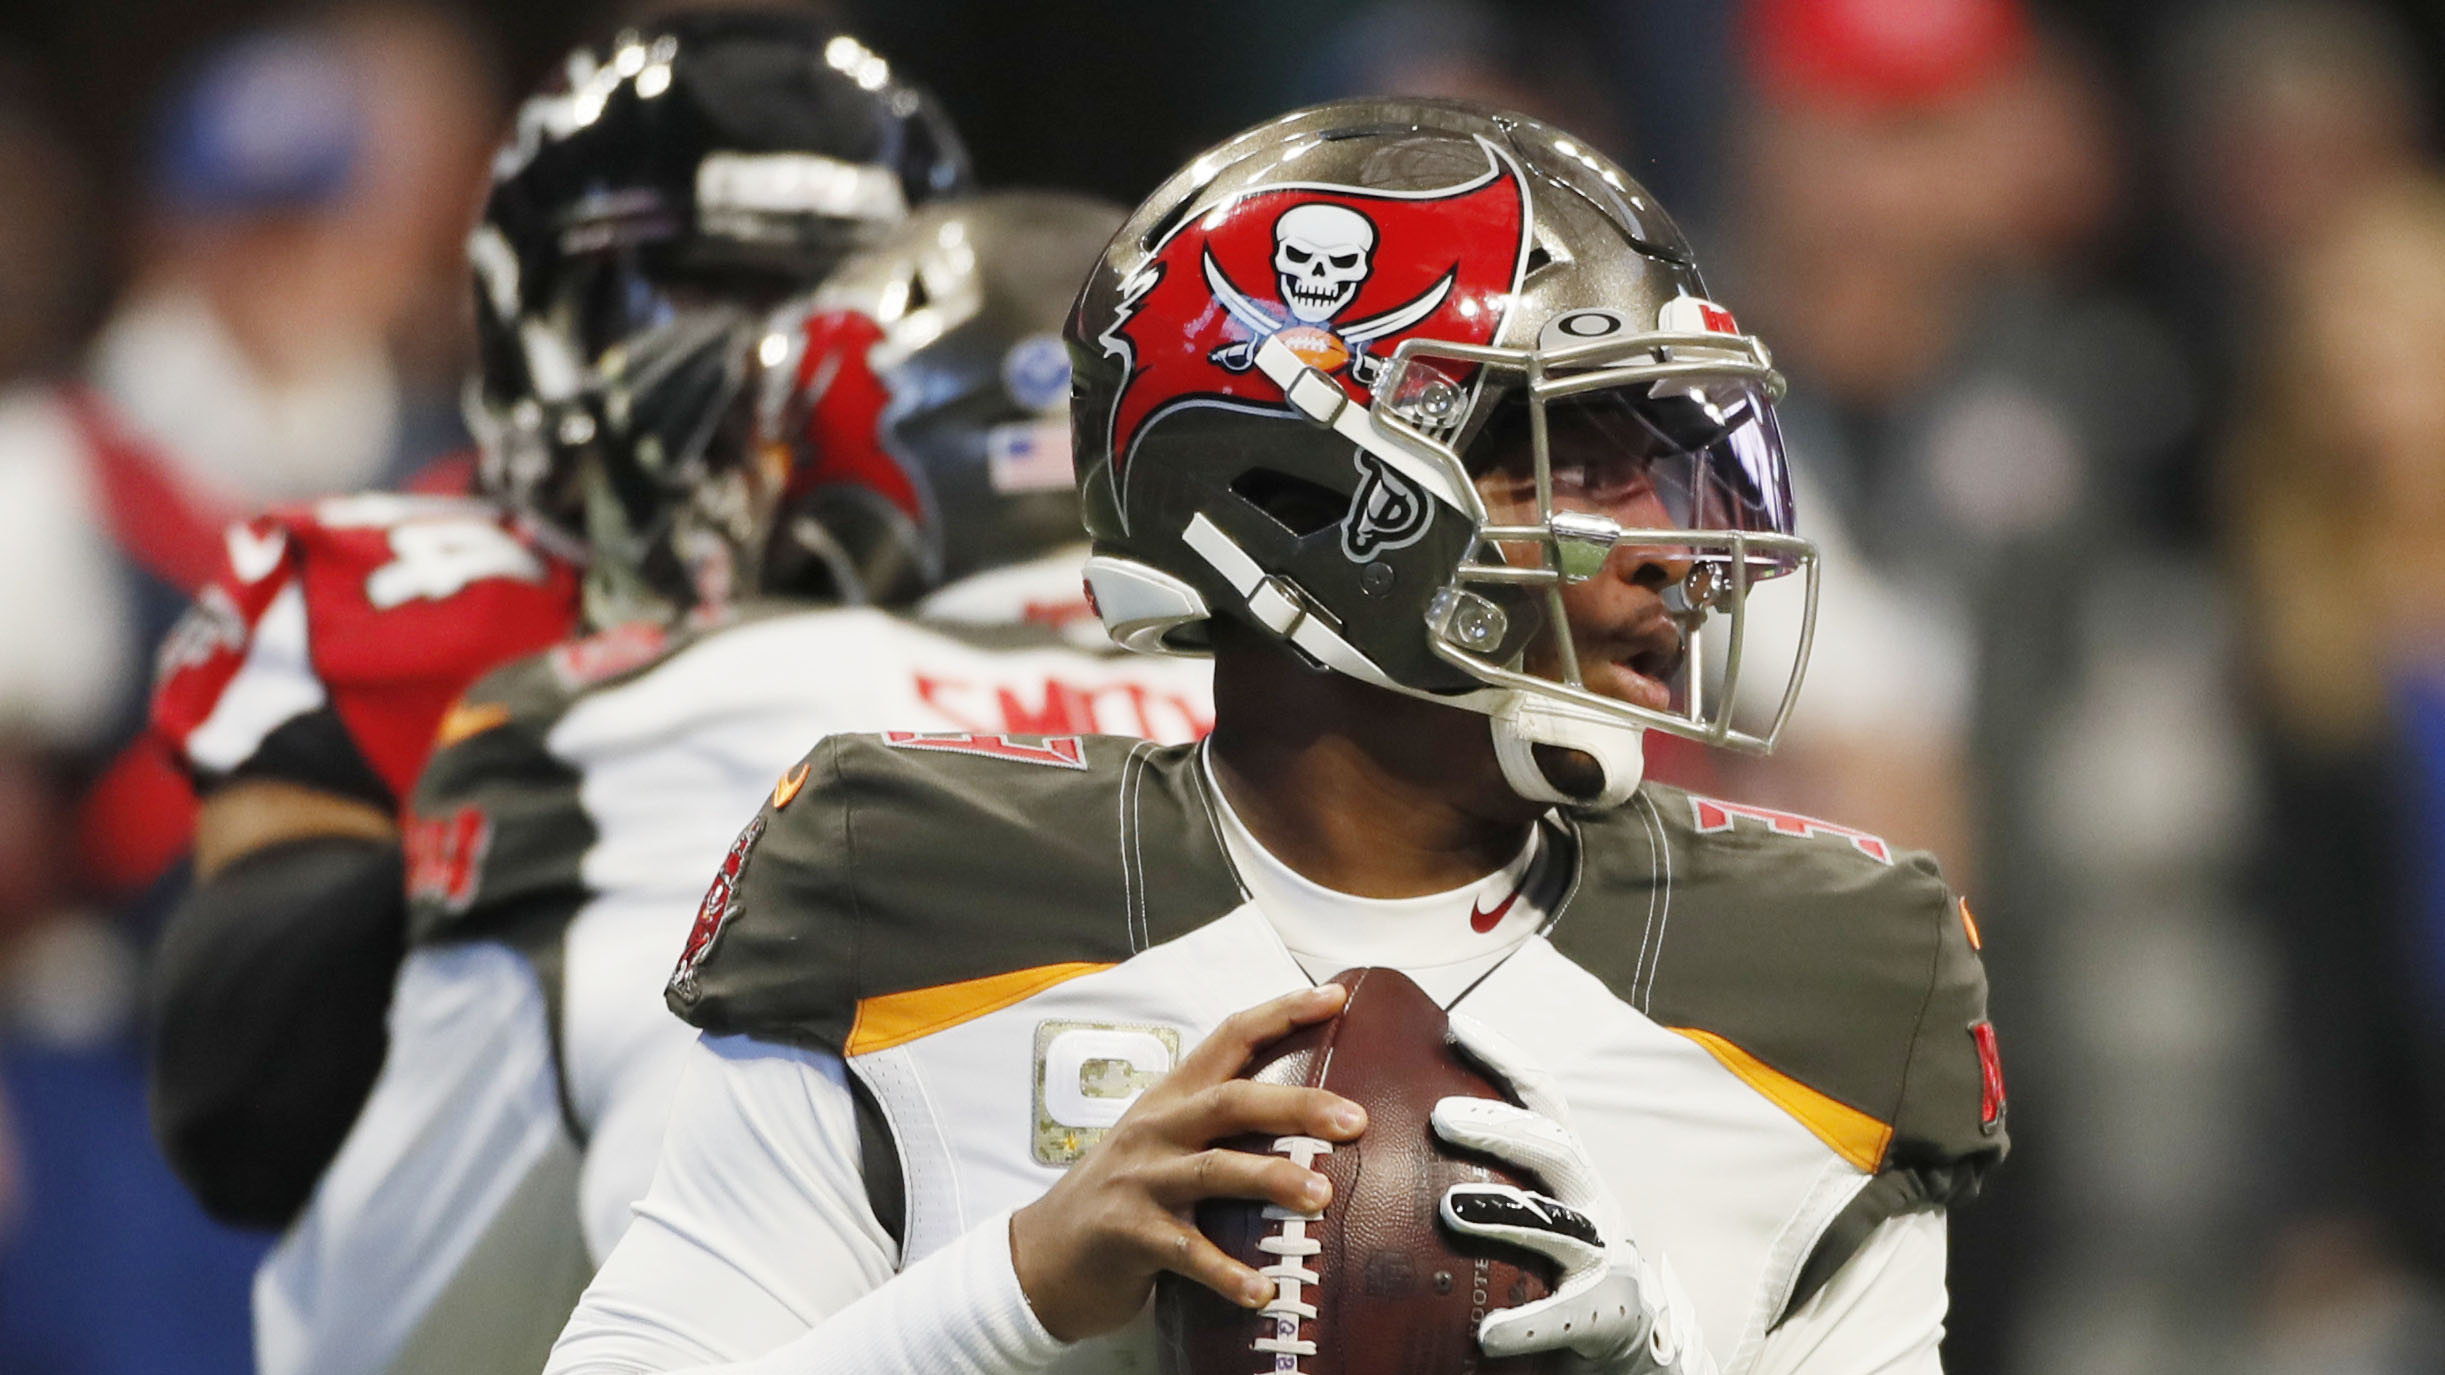 A quick look at Jameis Winston and the Bucs